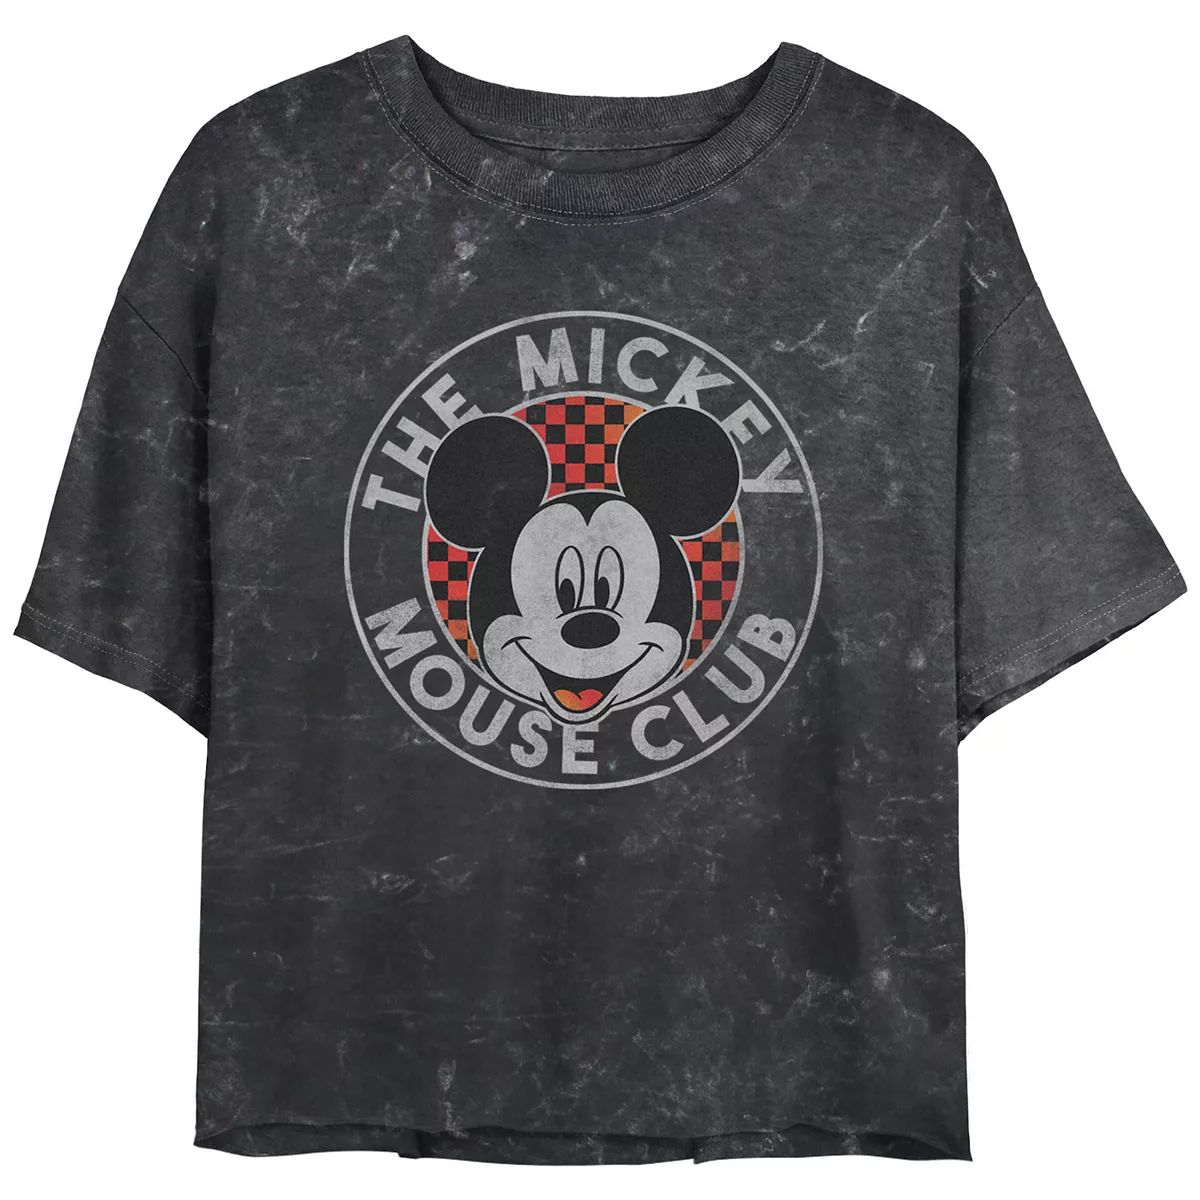 Disney's The Mickey Mouse Club Crop Top Mineral Wash Juniors' Graphic Tee | Kohl's